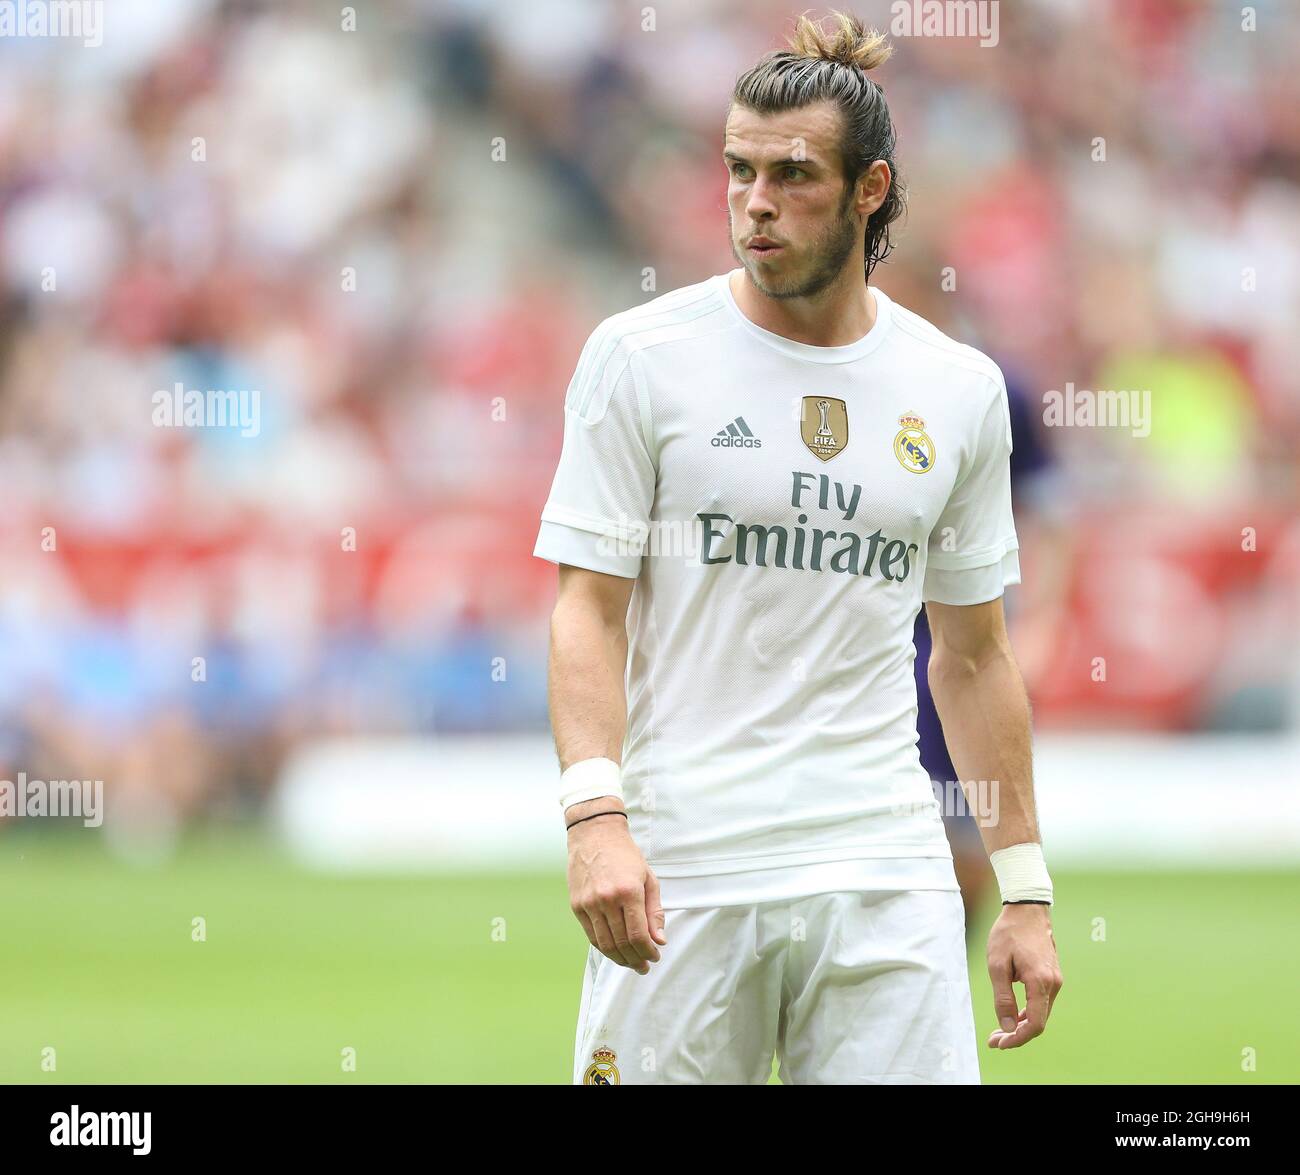 Image Aug 4 15 Munich United Kingdom Real Madrid S Gareth Bale In Action Audi Cup Real Madrid Vs Tottenham Hotspur Allianz Arena Munich Germany 4th August 15 Stock Photo Alamy